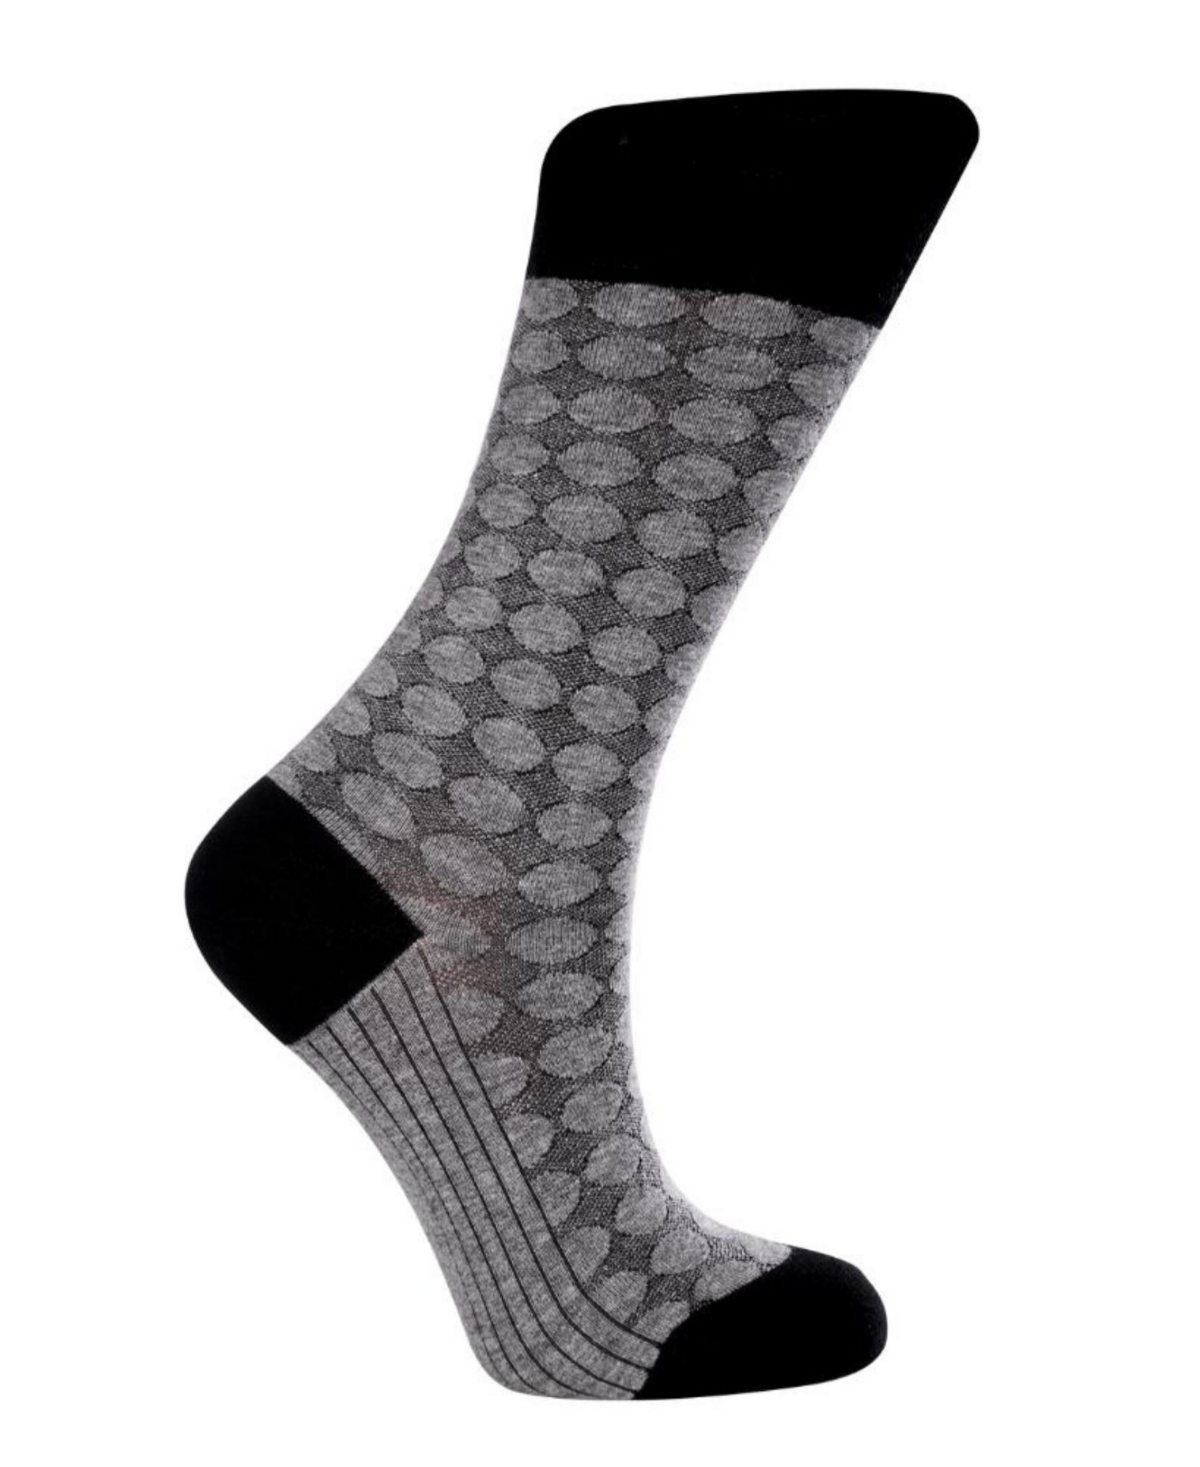 Love Sock Company Women's Circles W-Cotton Dress Socks with Seamless Toe Design, Pack of 1